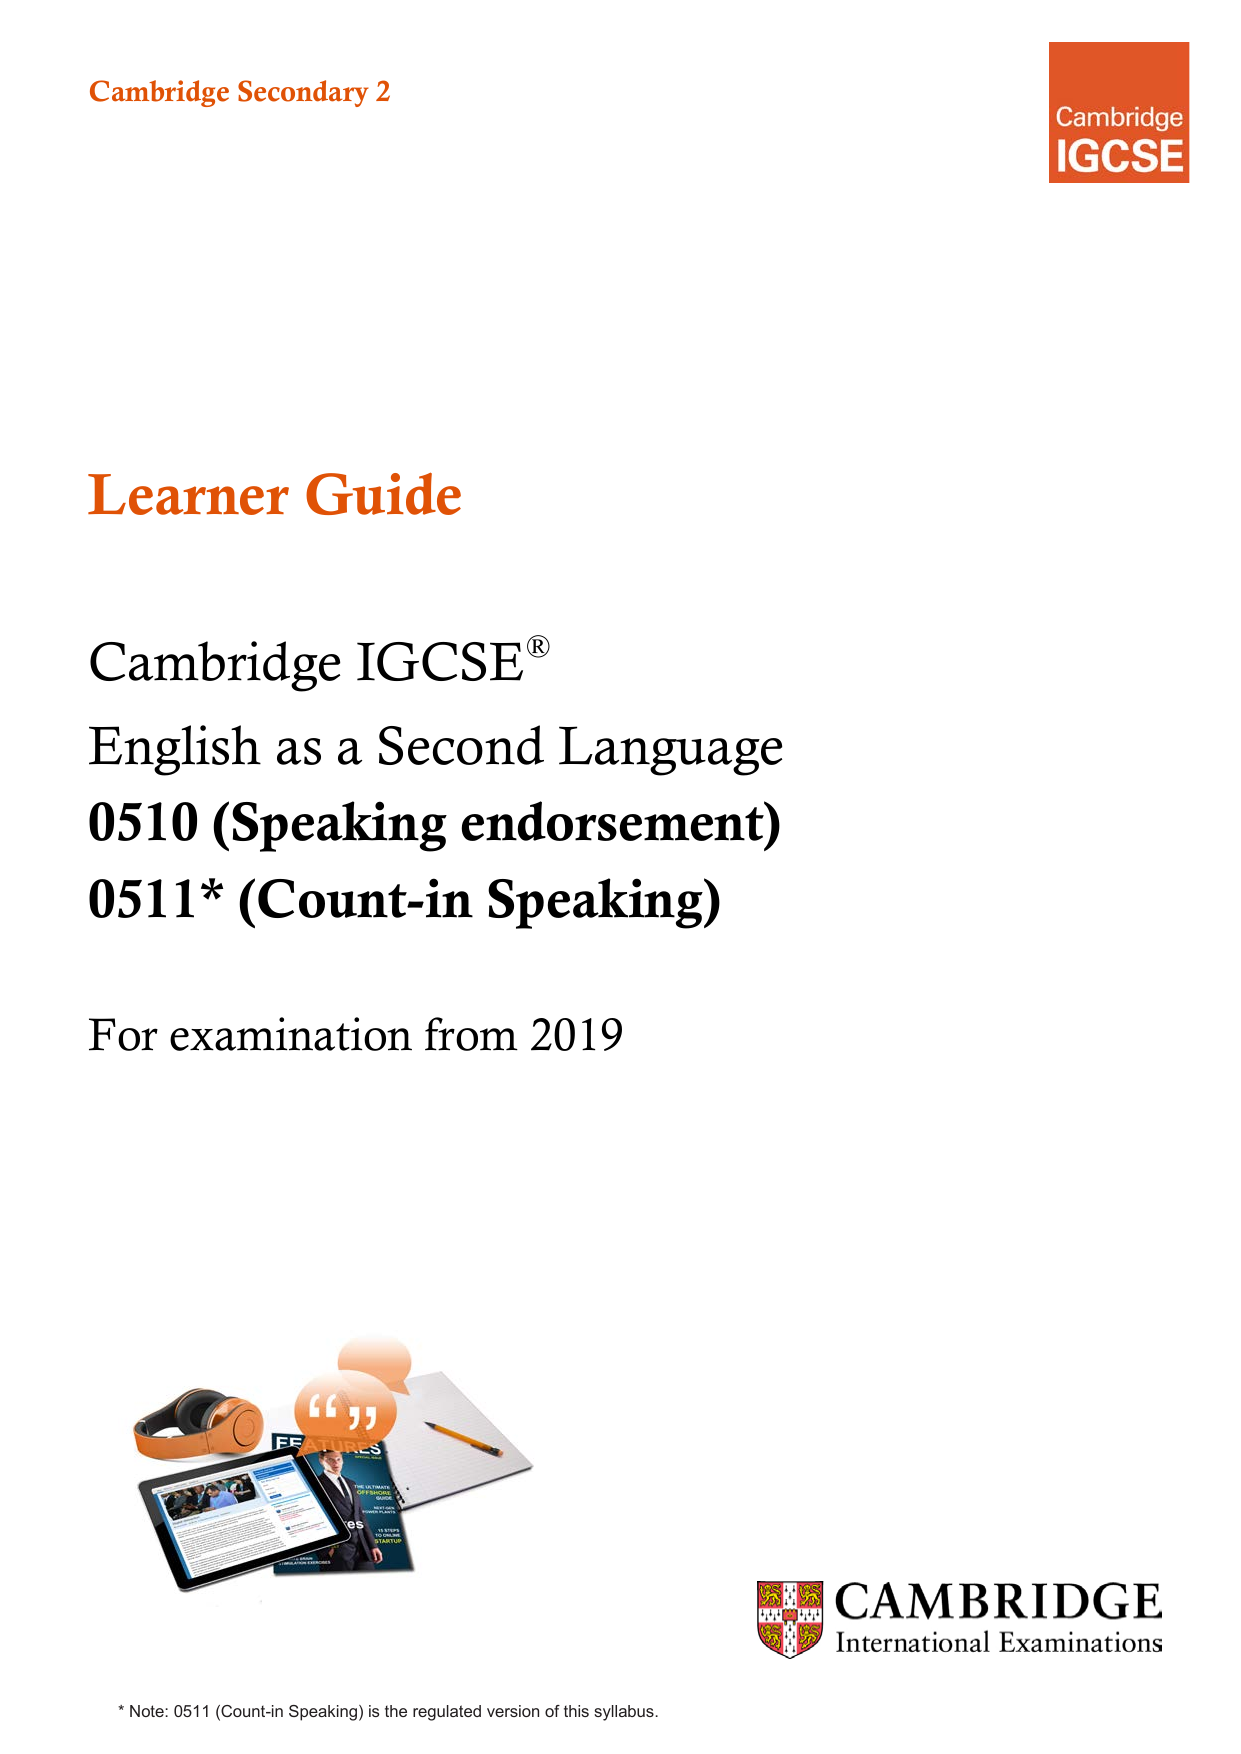 esl-learner-guide-for-cambridge-igcse-english-second-language-0510-11-for-examination-from-2019